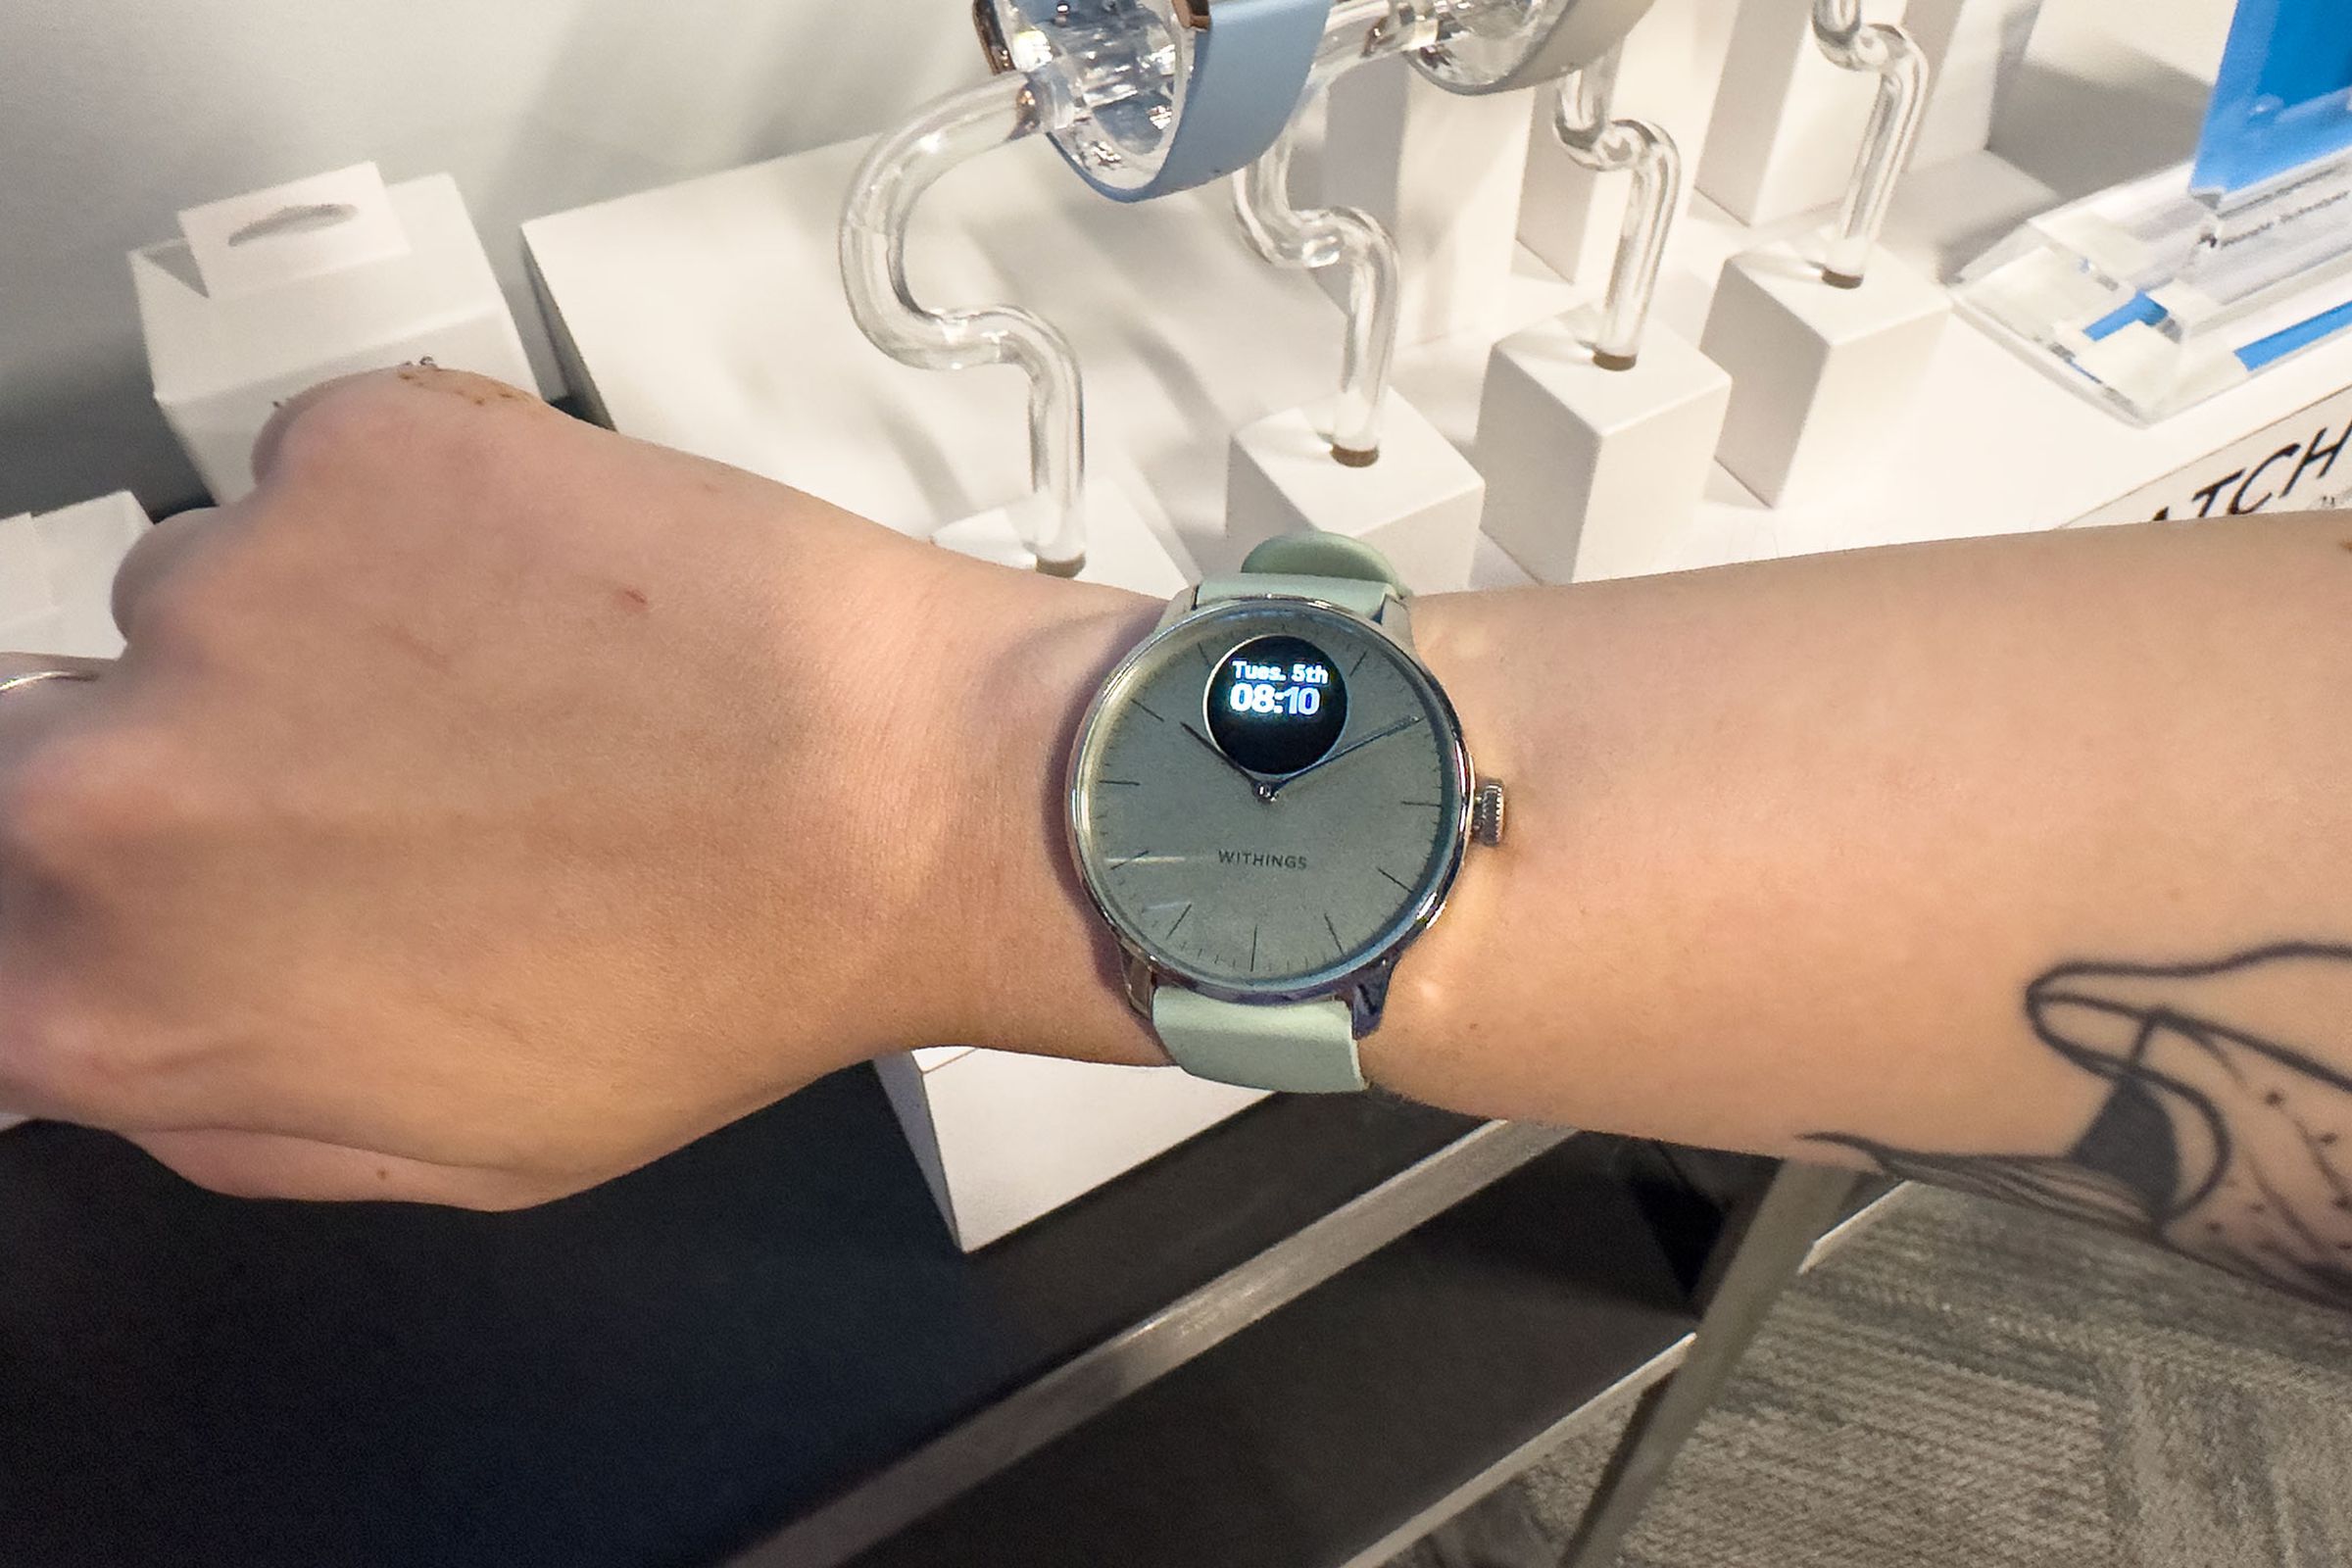 ScanWatch Light on someone’s arm